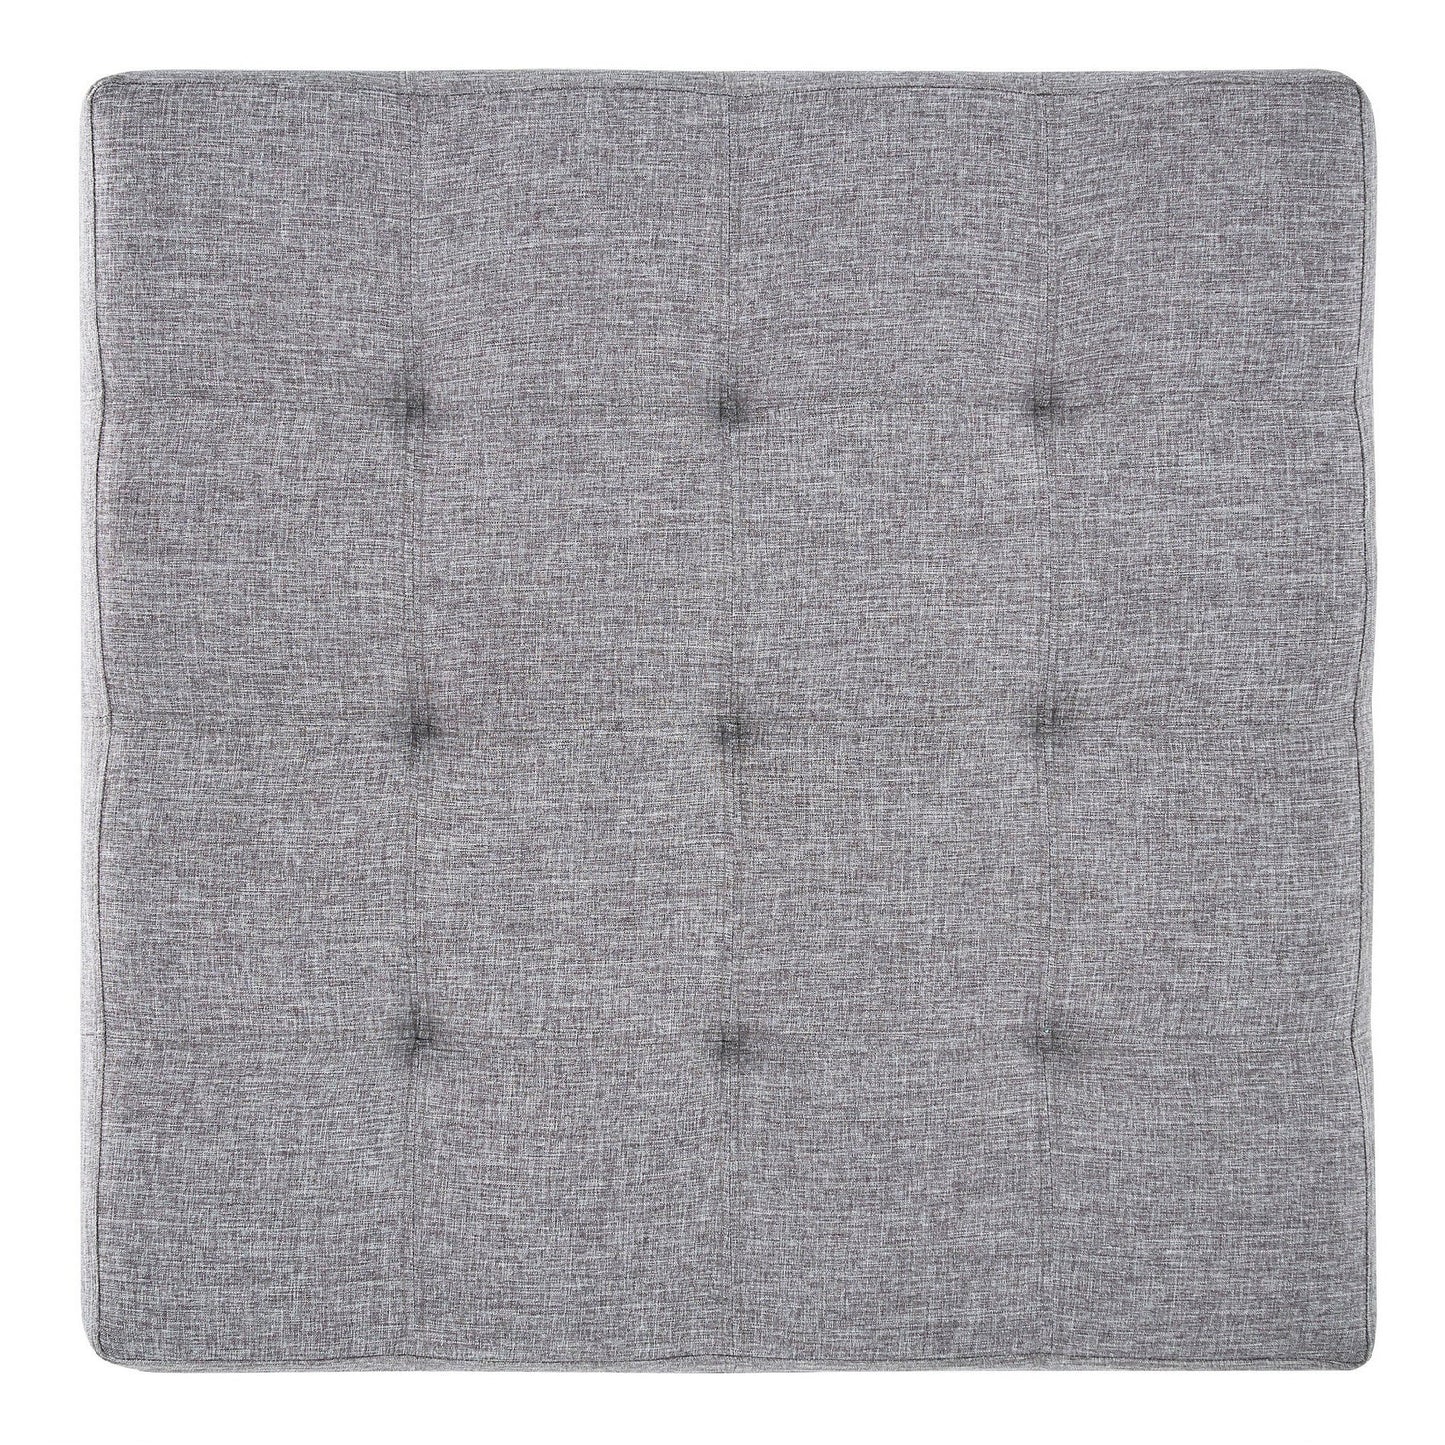 Champagne Gold Square Base Ottoman - Grey Linen, Dimpled Tufts